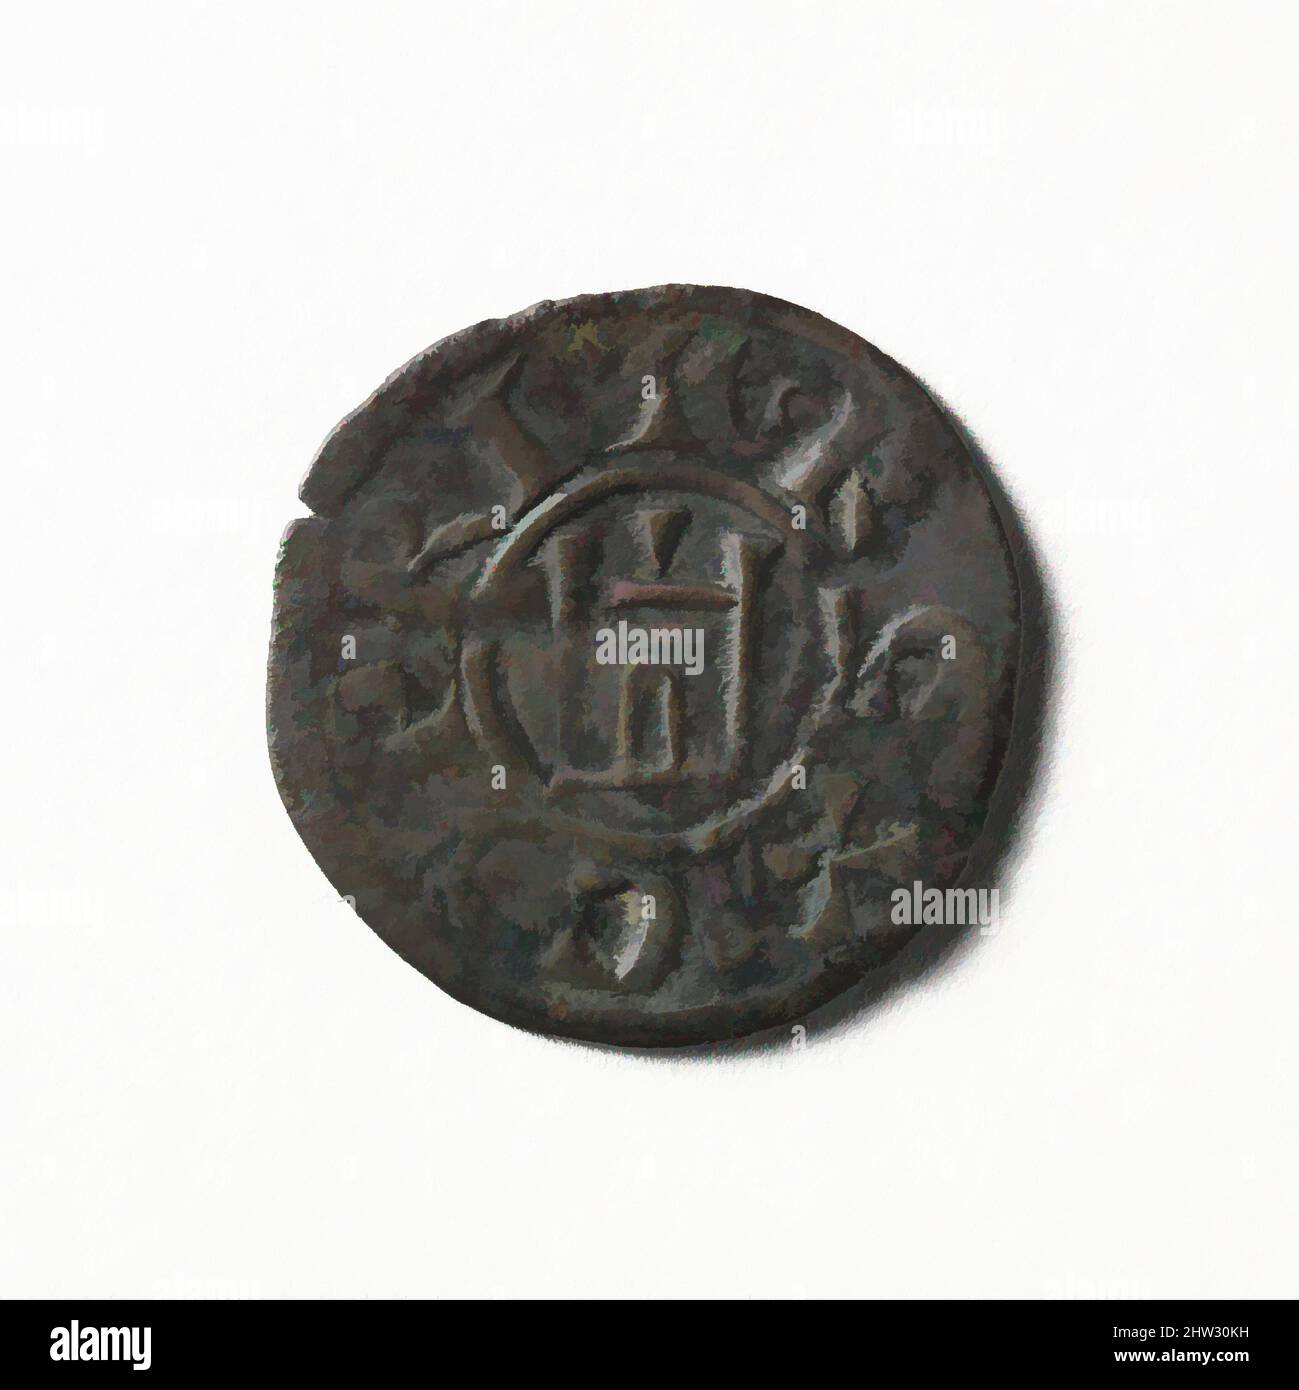 Art inspired by Coin (Denier) of Henry I of Cyprus (1218–1253), 1218–1253, near Acre, Cypriote, Silver, Diam. 3/4 in. (1.9 cm), Miscellaneous, Classic works modernized by Artotop with a splash of modernity. Shapes, color and value, eye-catching visual impact on art. Emotions through freedom of artworks in a contemporary way. A timeless message pursuing a wildly creative new direction. Artists turning to the digital medium and creating the Artotop NFT Stock Photo